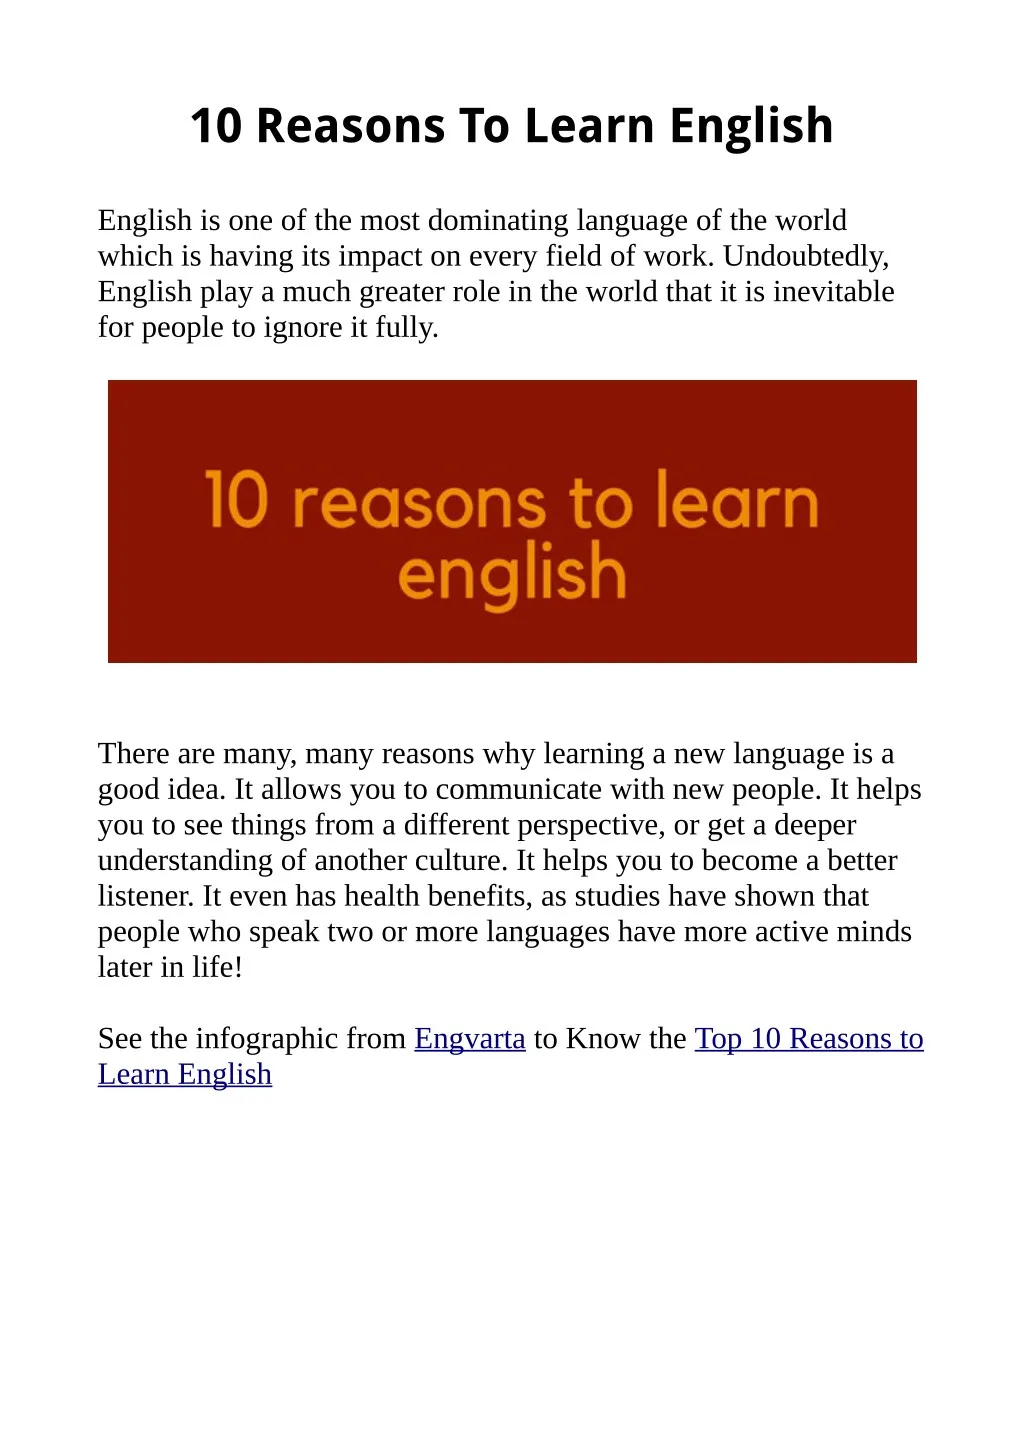 PPT - 10 Reasons To Learn English PowerPoint Presentation, free